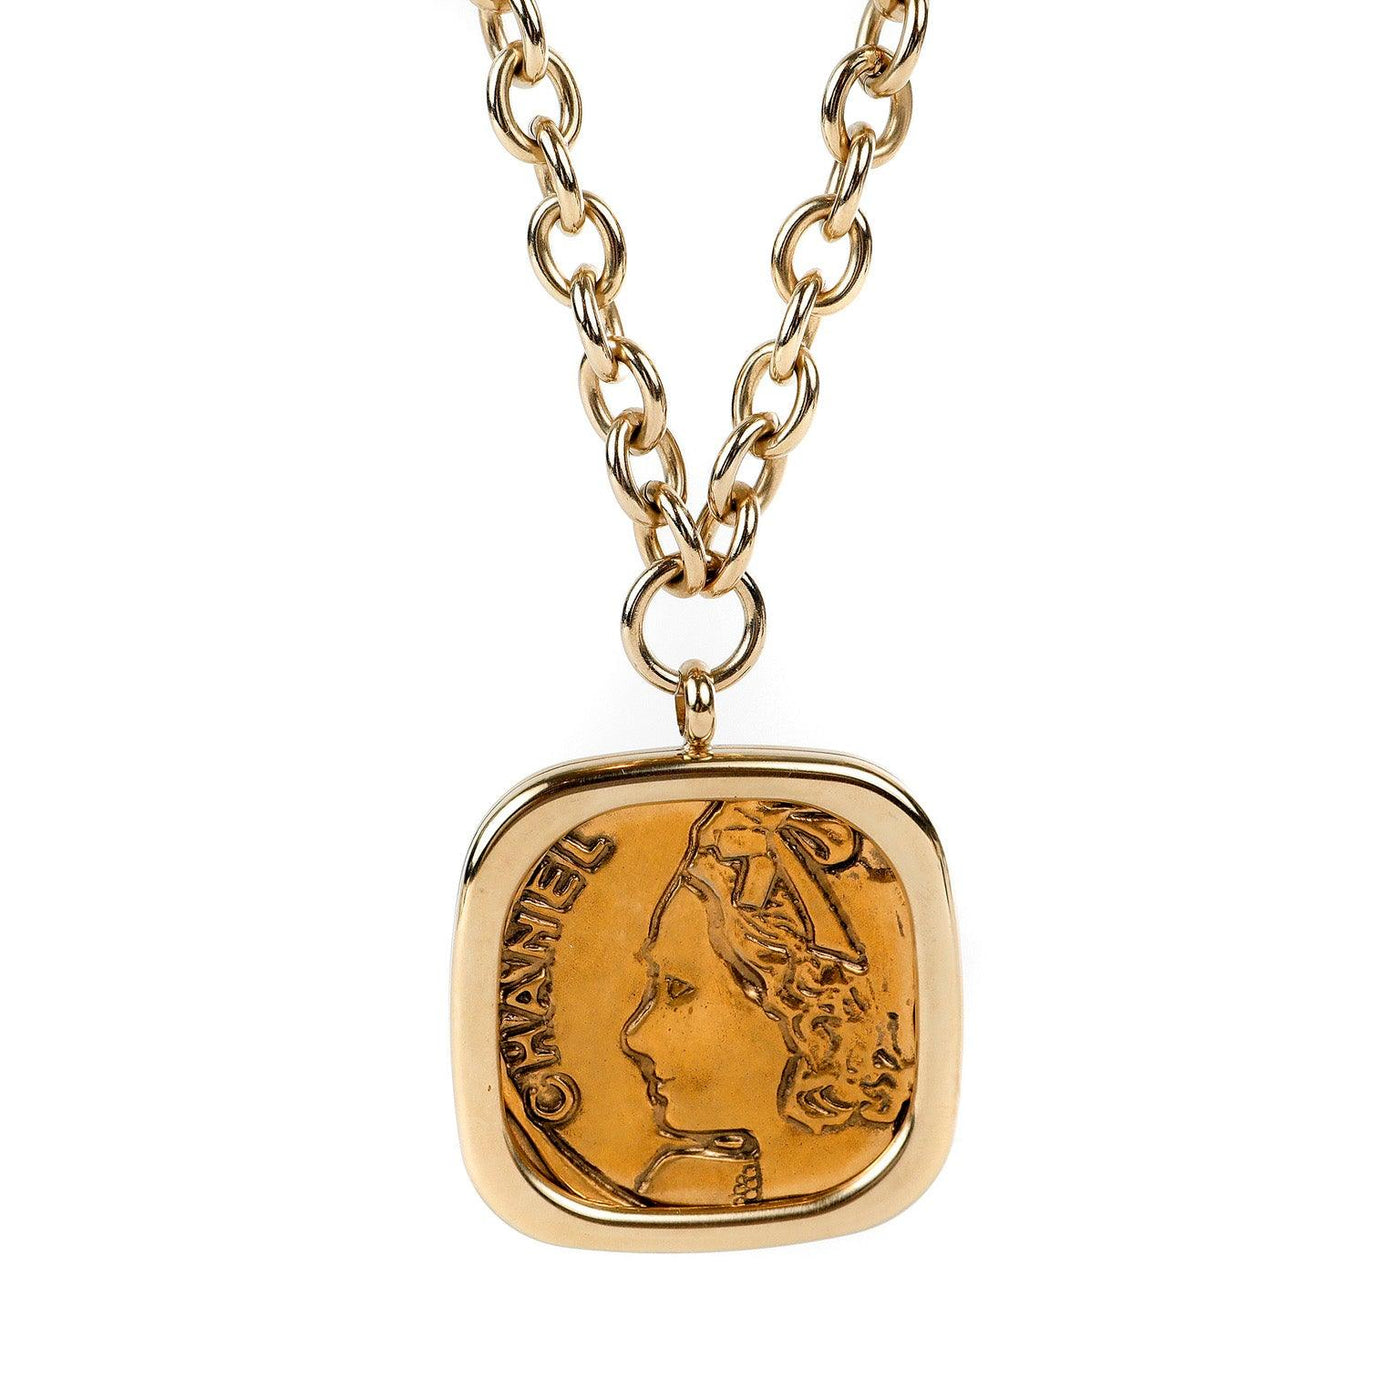 Chanel Large Gold Medallion Necklace - Only Authentics